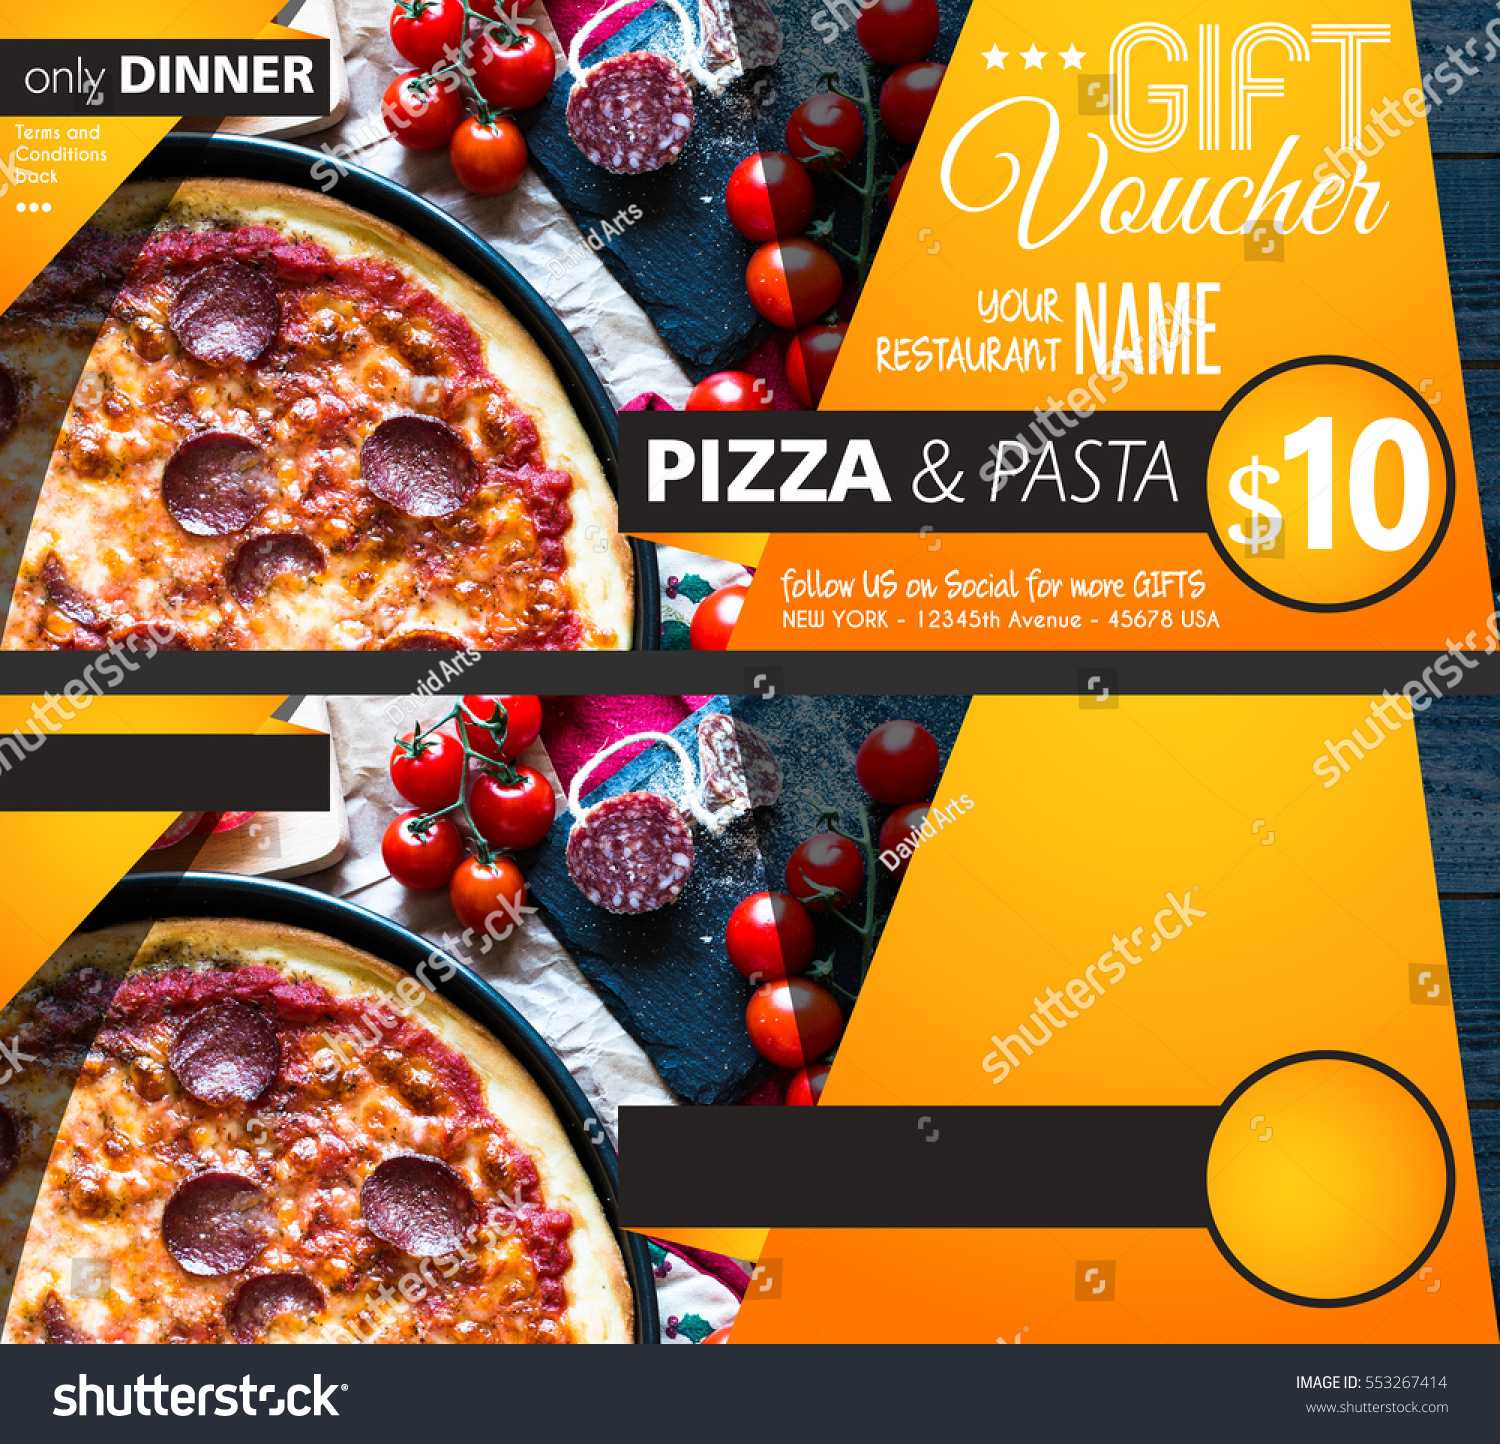 Restaurant Gift Voucher Flyer Template Delicious Stock Image Within Pizza Gift Certificate Template